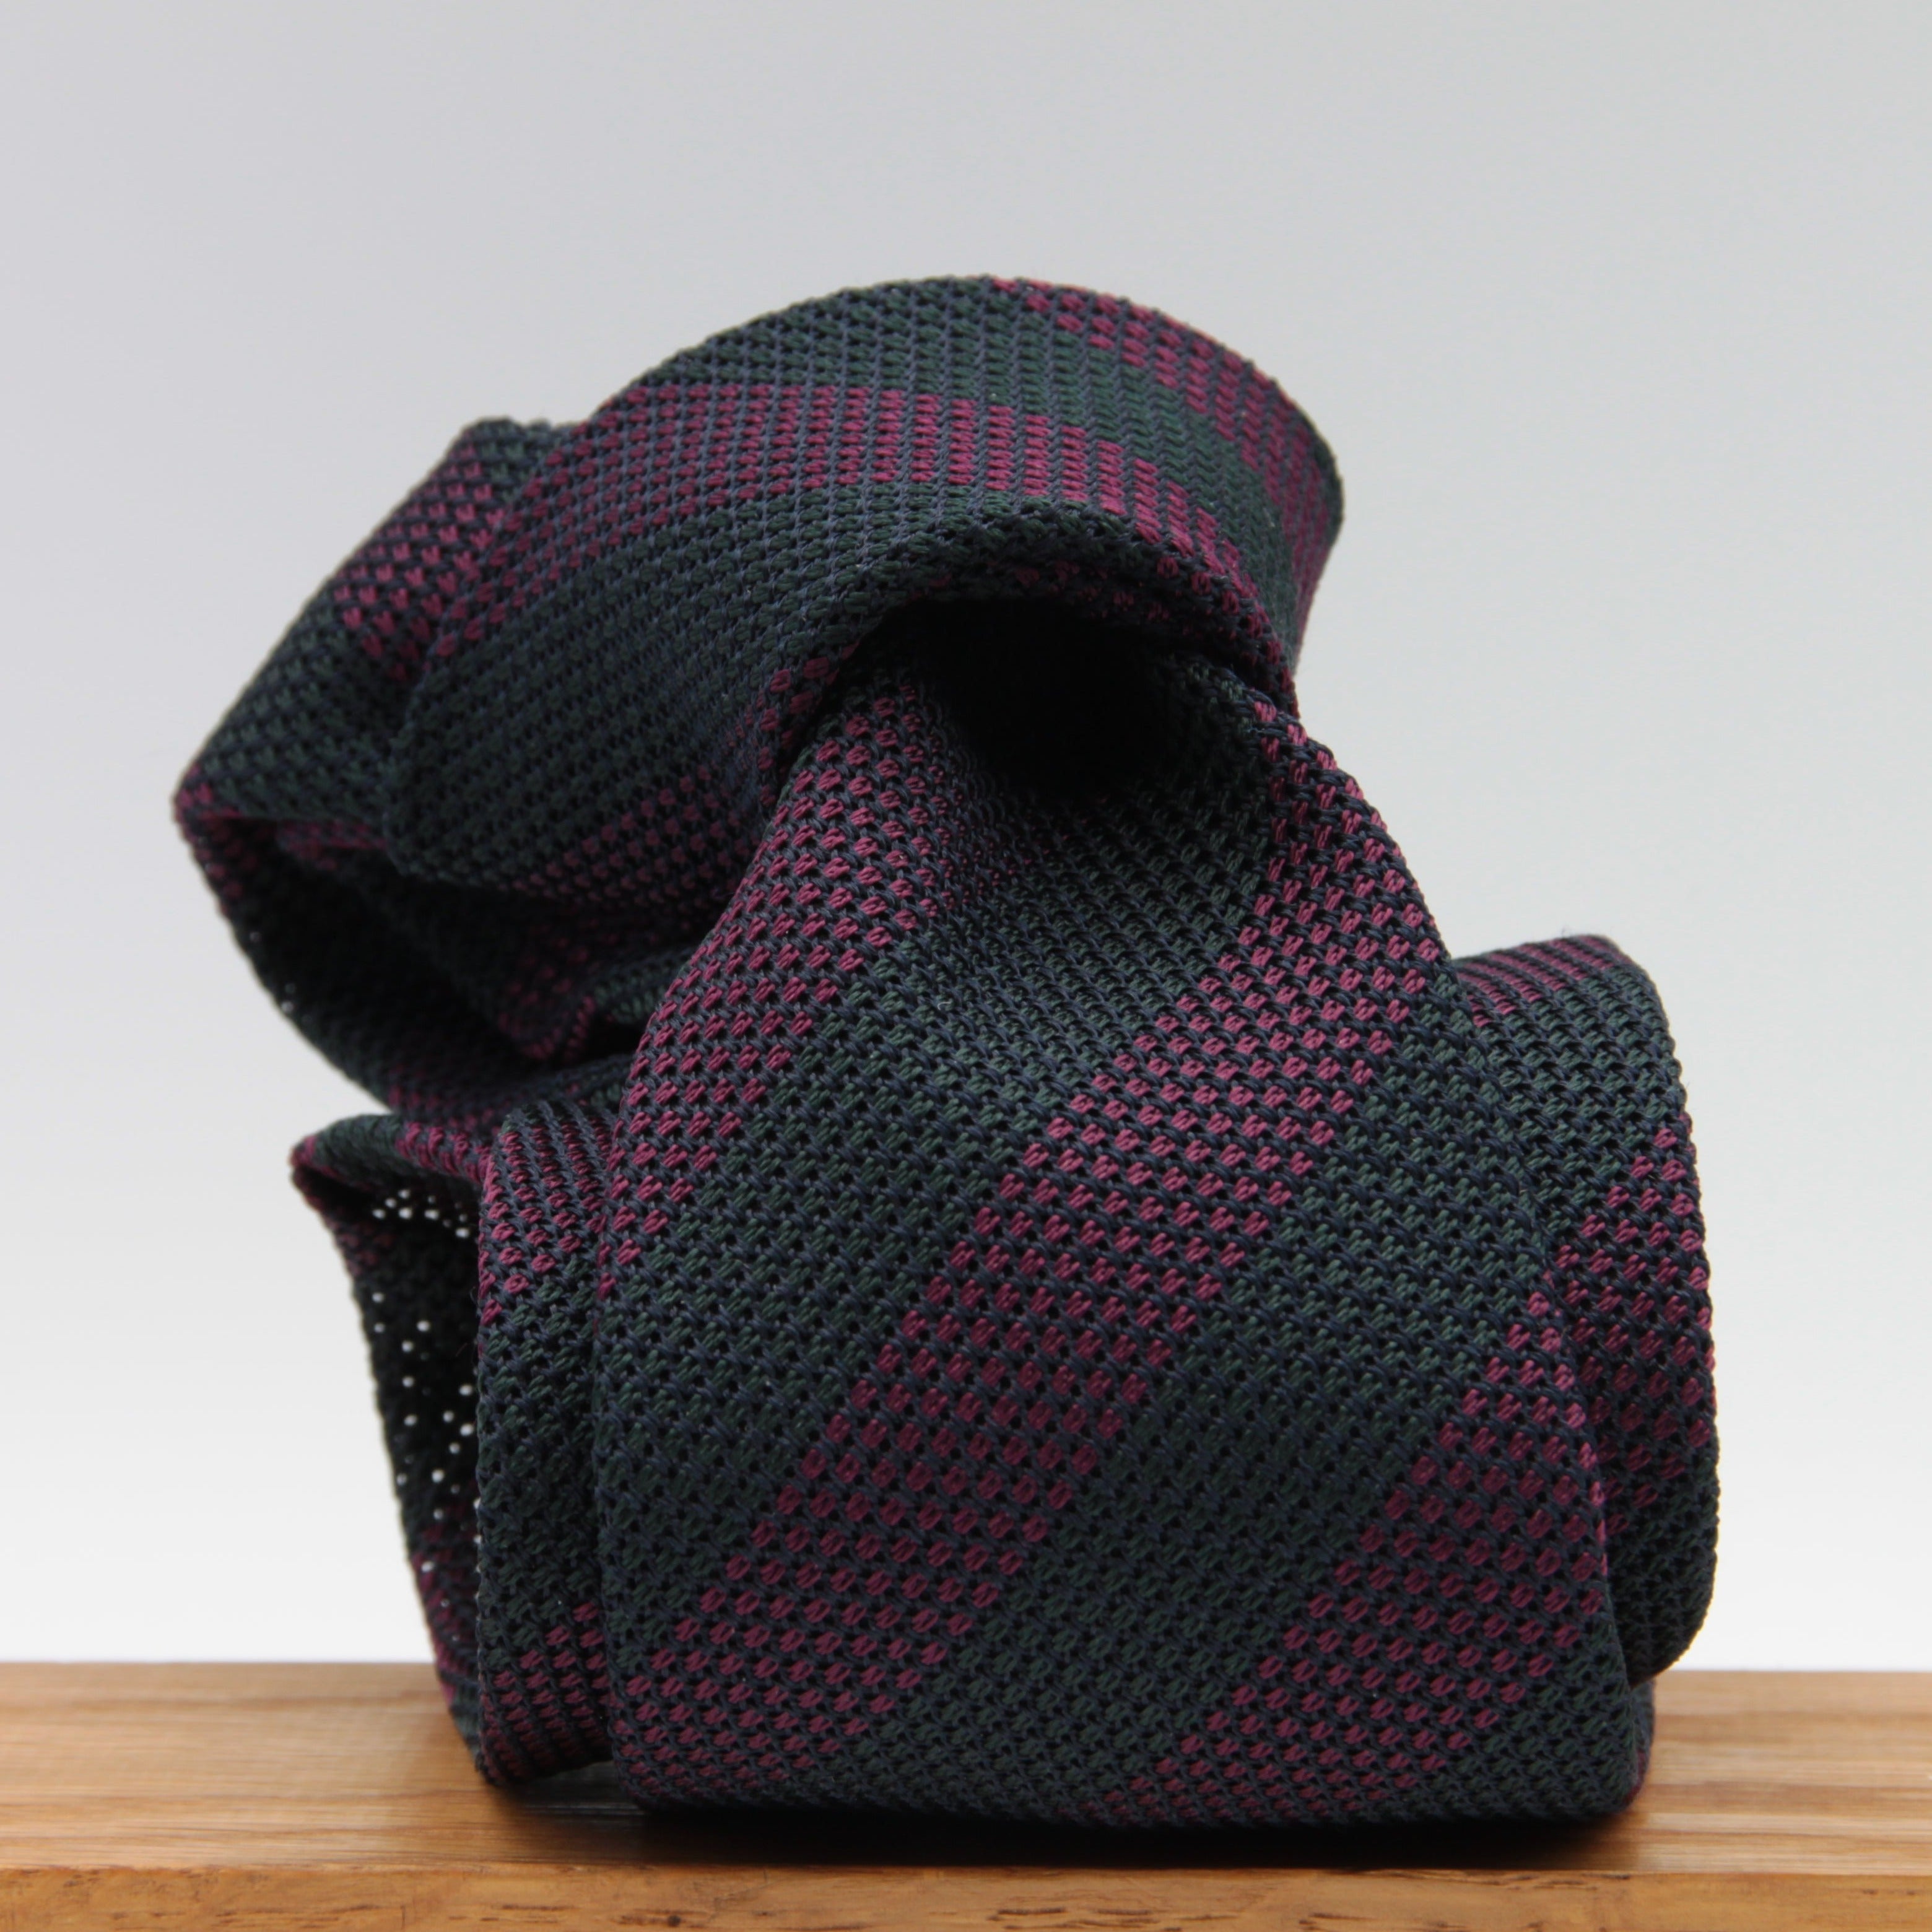 Cruciani & Bella 100% Silk Garza Sottile Woven in Italy Unlined Hand rolled blades Dark Green and Fucsia Handmade in Italy 8 cm x 150 cm #6200